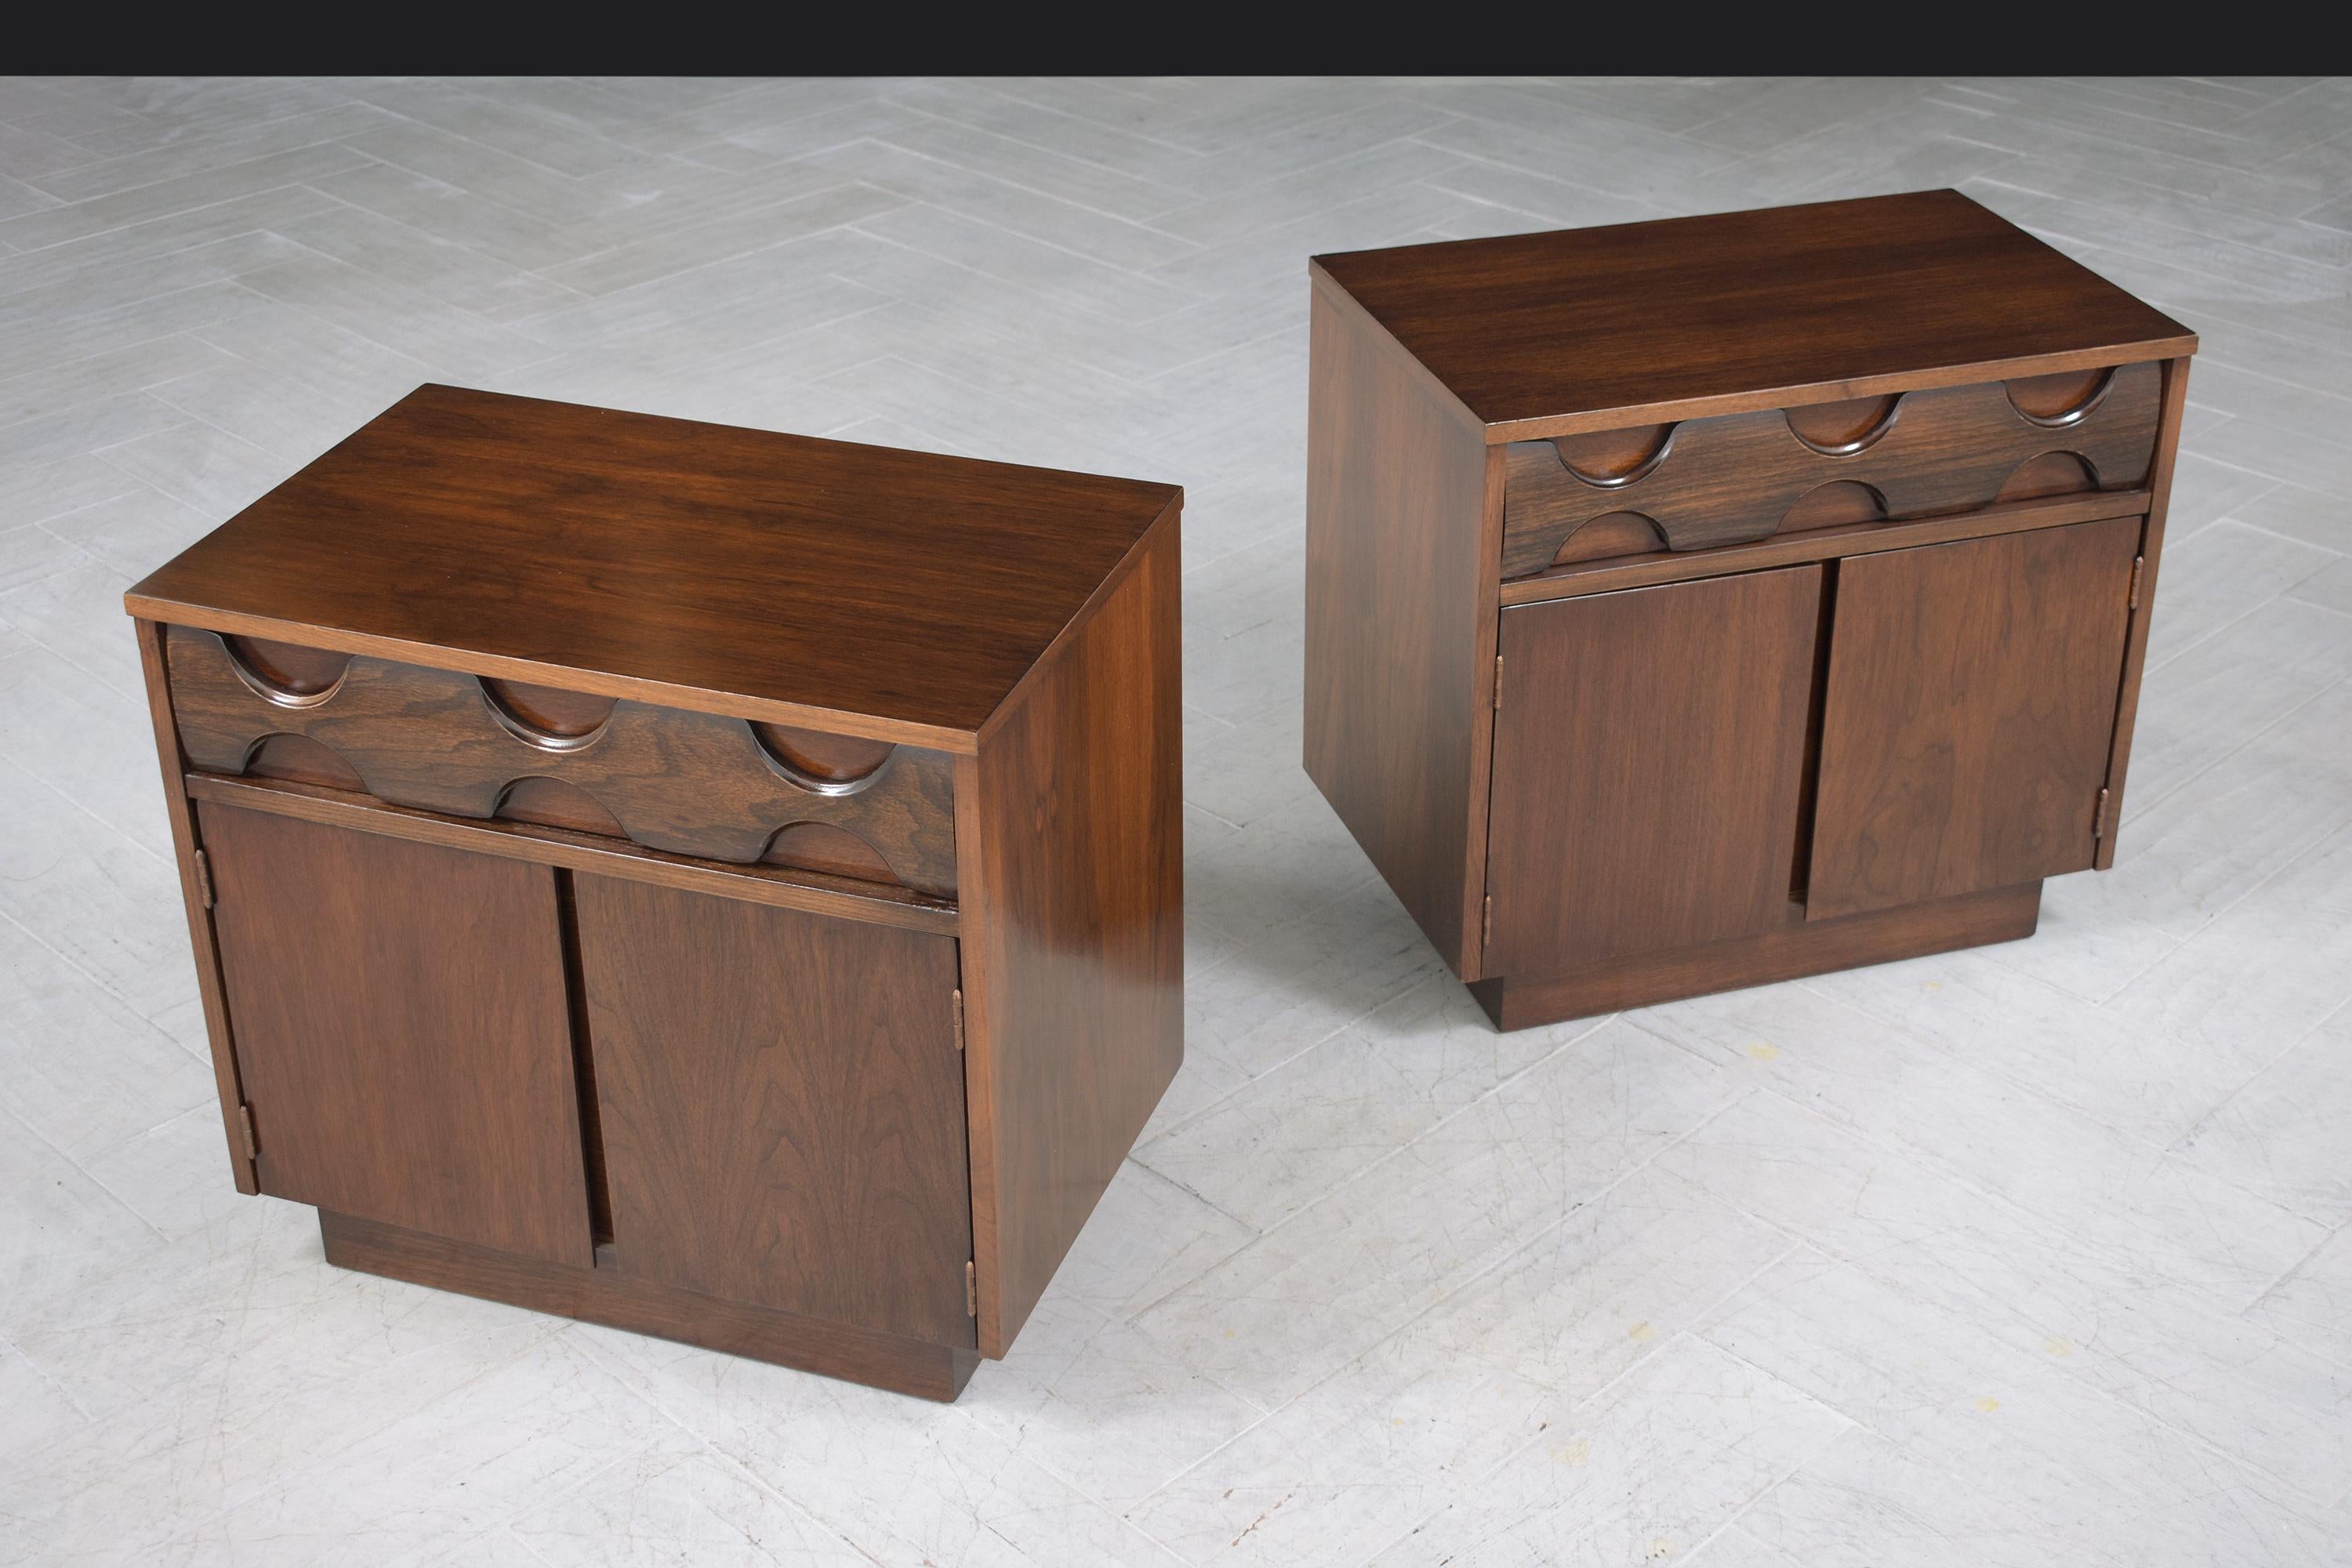 An extraordinary pair of vintage mid-century modern nightstands are in great condition beautifully hand-crafted out of walnut wood and are completely restored and refinished by our professional craftsmen team. This set of two side bed tables